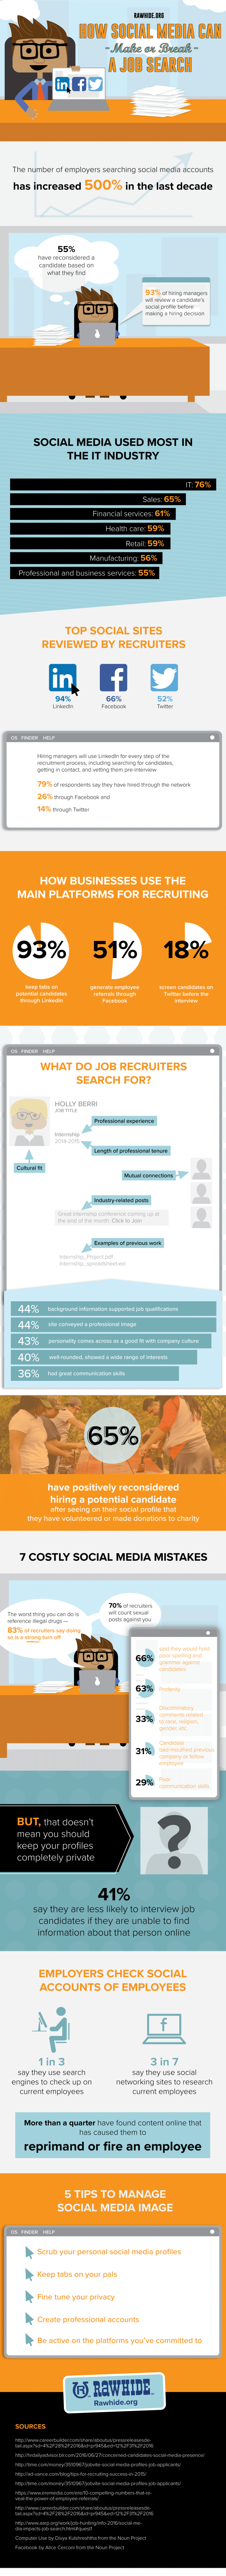 Job-Searching-and-Social-Media-Infographic